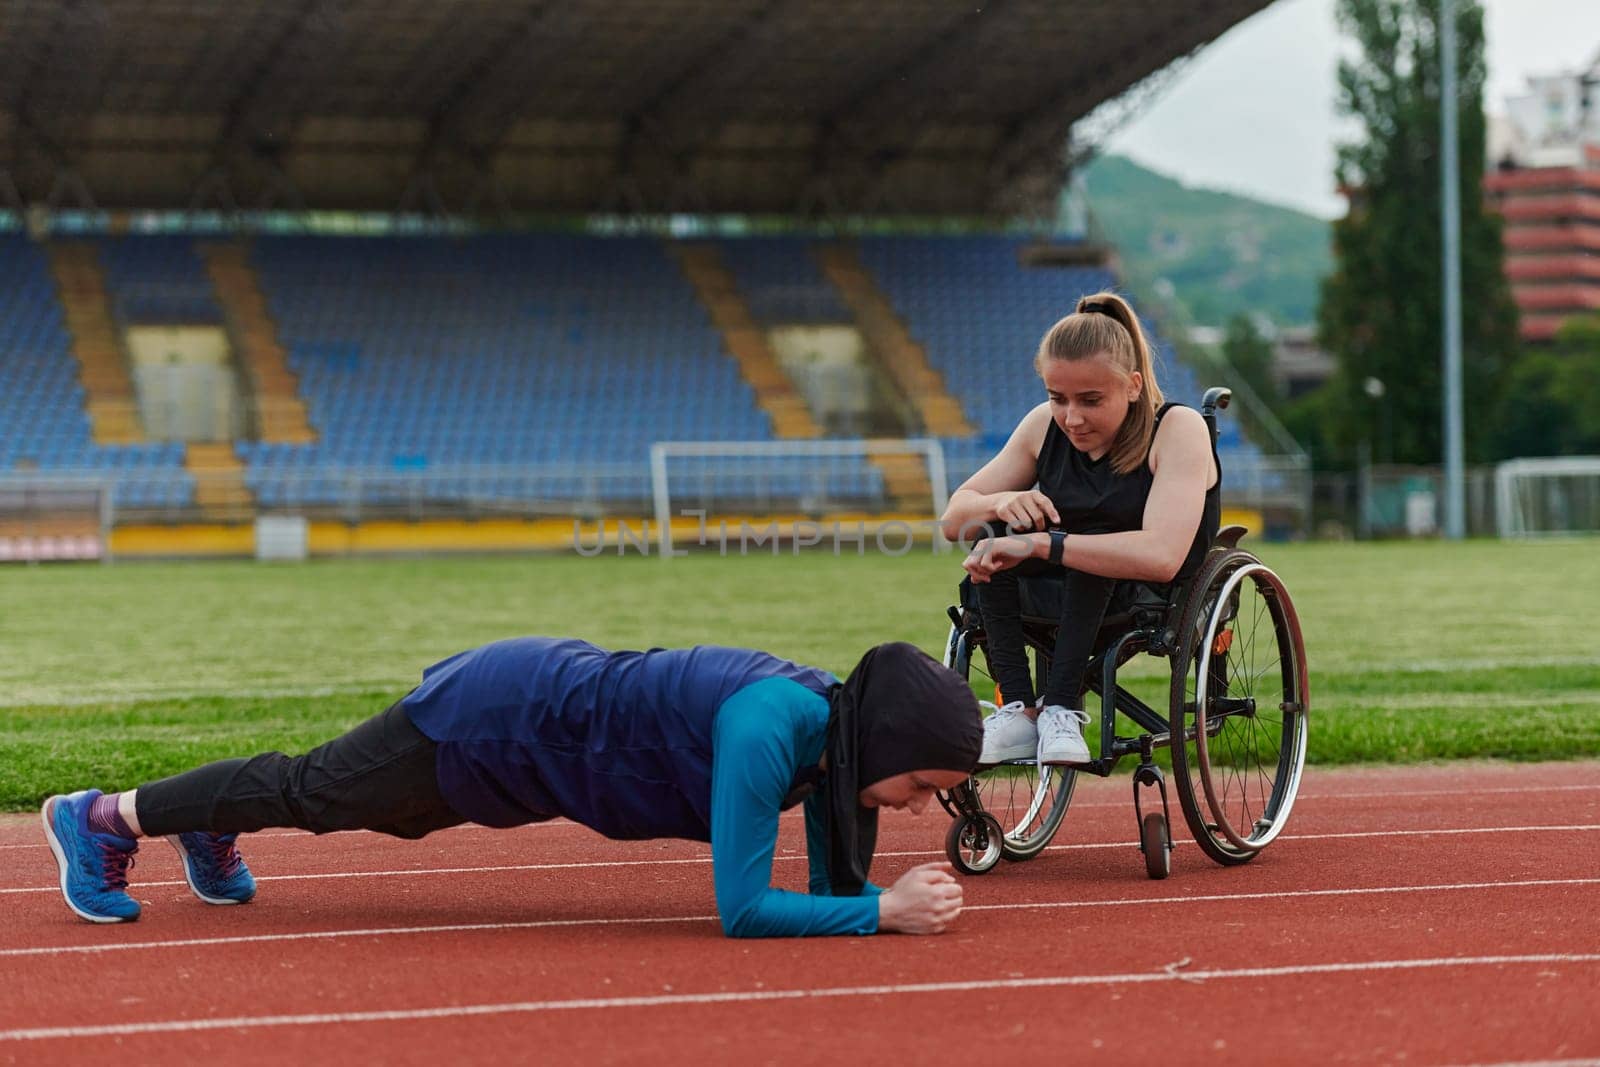 Two strong and inspiring women, one a Muslim wearing a burka and the other in a wheelchair stretching and preparing their bodies for a marathon race on the track.